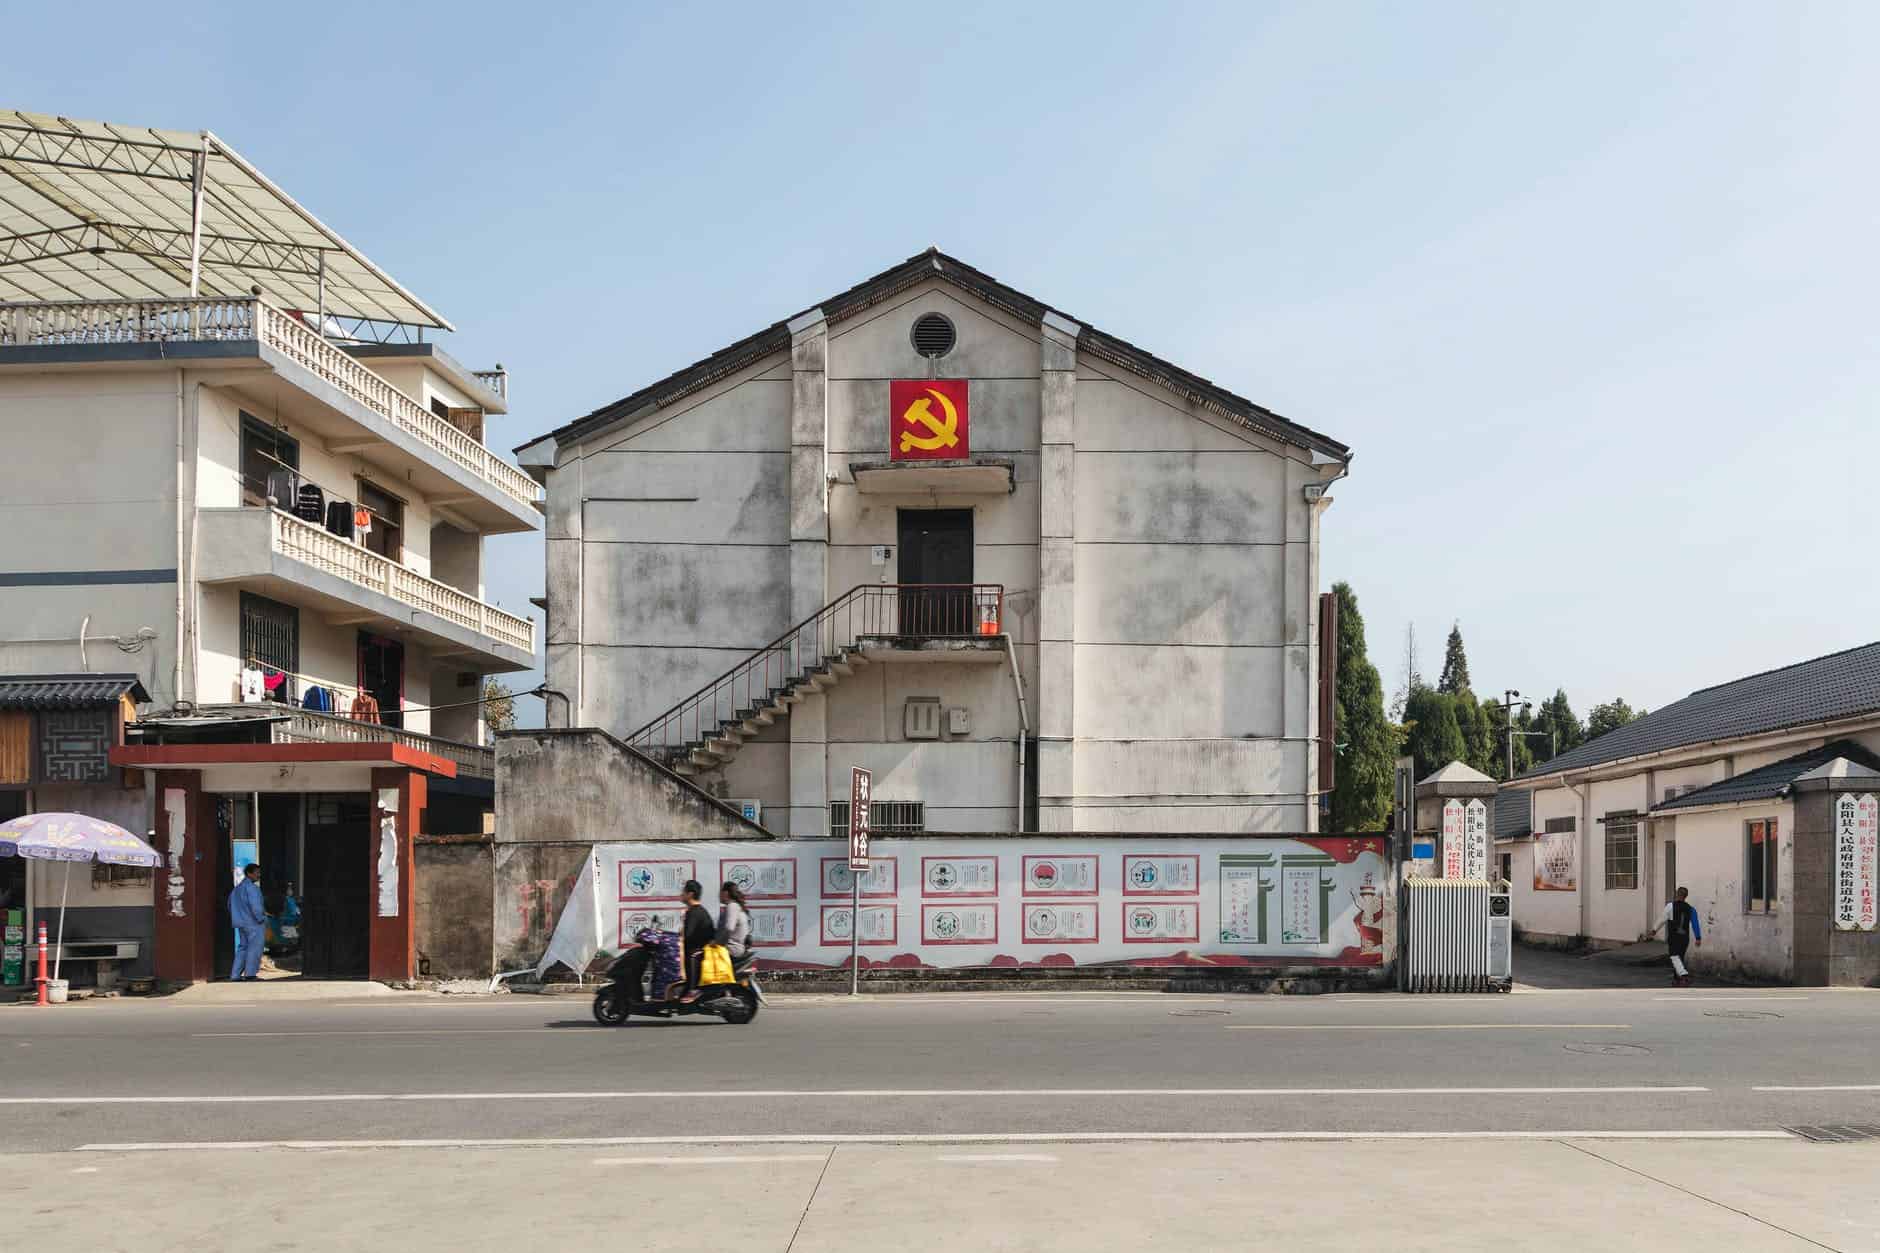 suburban district buildings decorated with hammer and sickle emblem